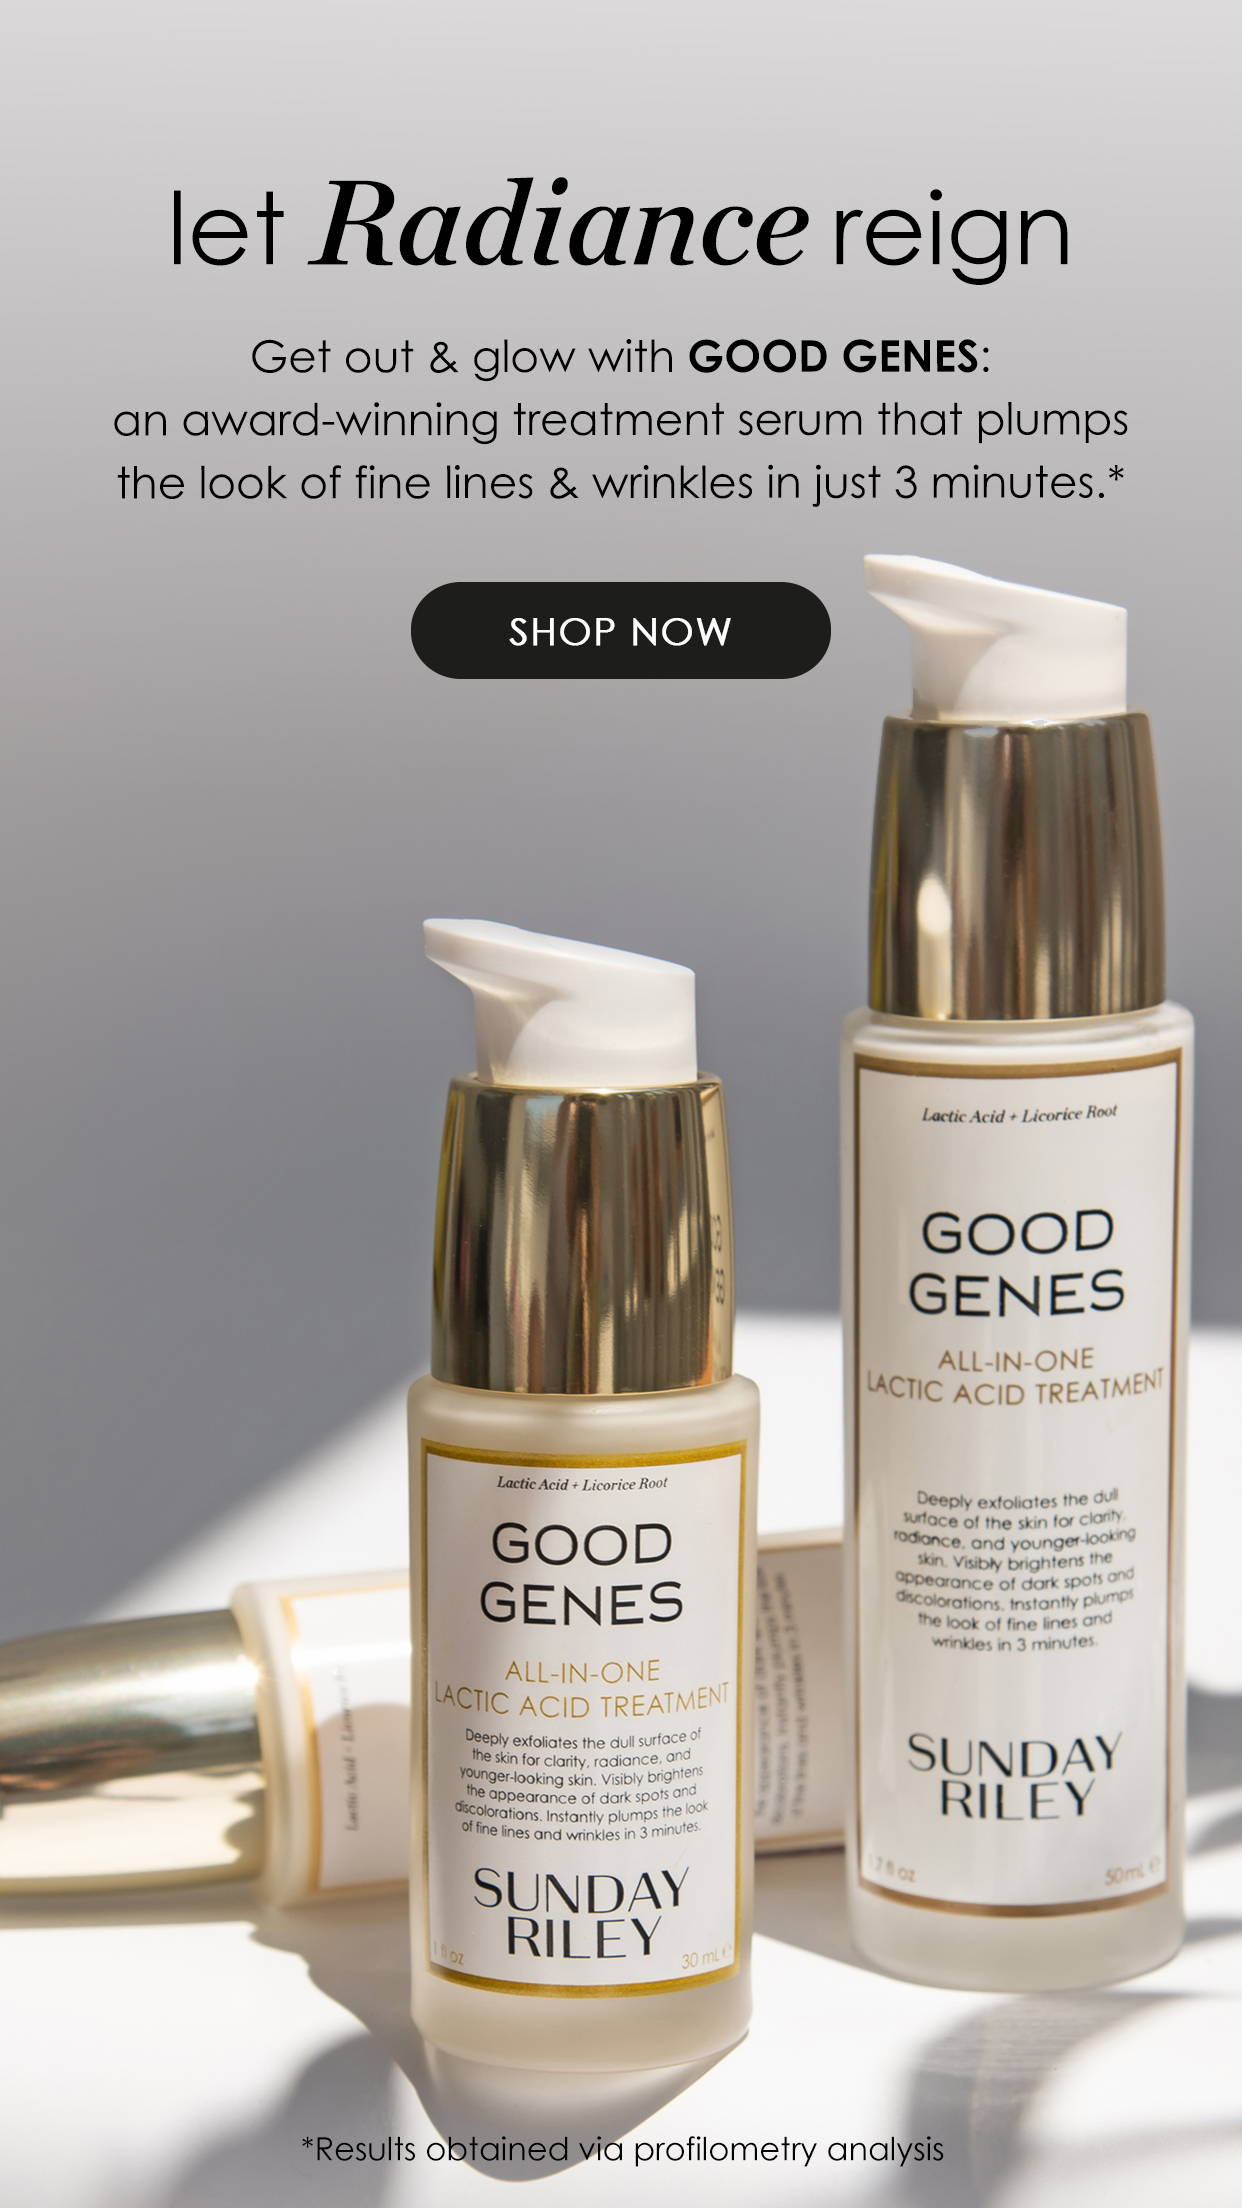 let radiance reign - Get out & glow with GOOD GENES: an award-winning treatment serum that plumps the look of fine lines & wrinkles in just 3 minutes.* - SHOP NOW